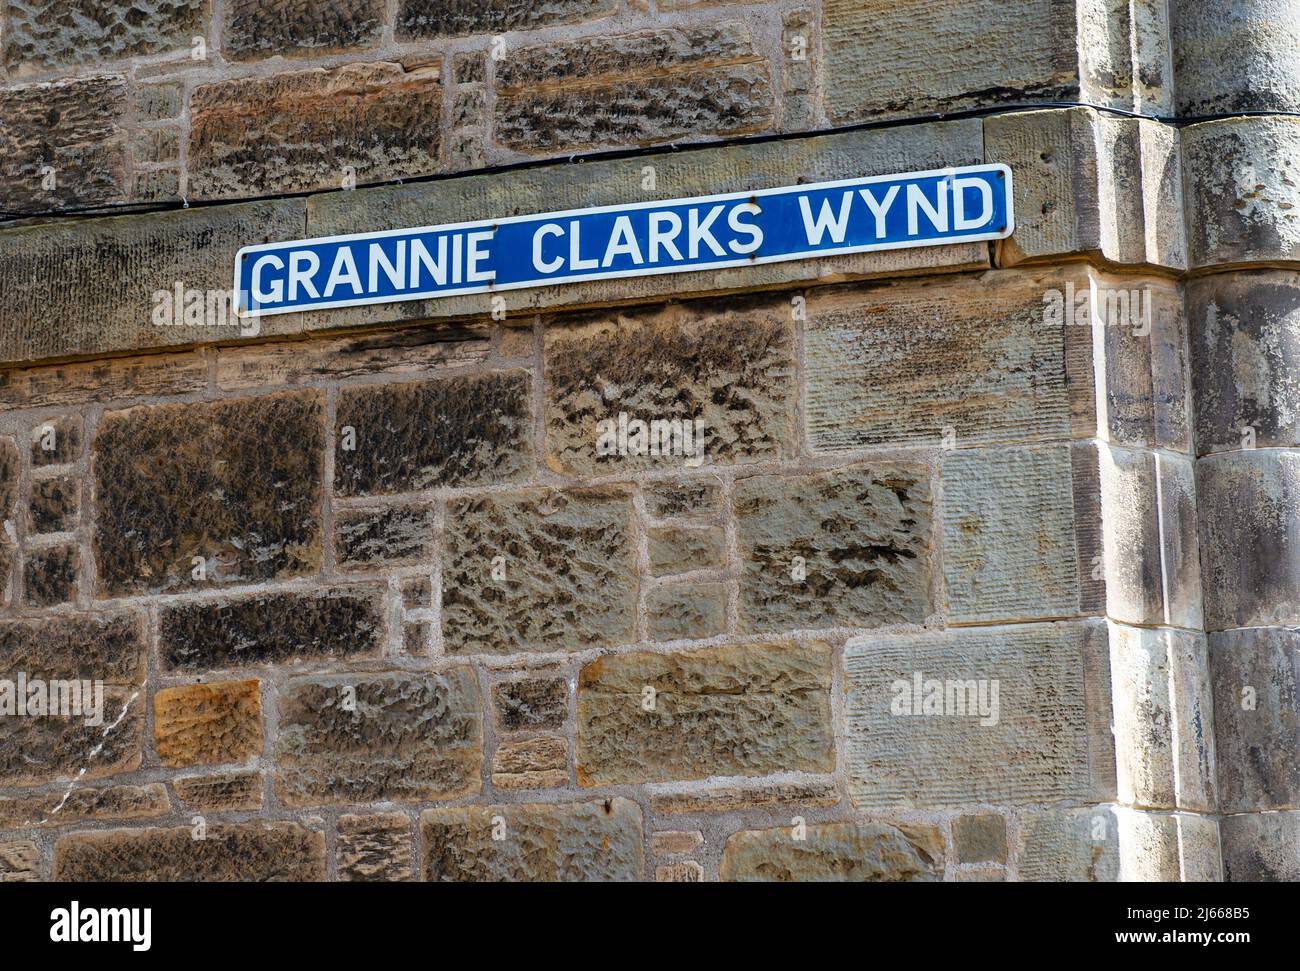 Grannie Clarks Wynd, St Andrews. The street crosses the 18th and 1st fairways of the Old Course which allows access to the West Sands beach. Stock Photo